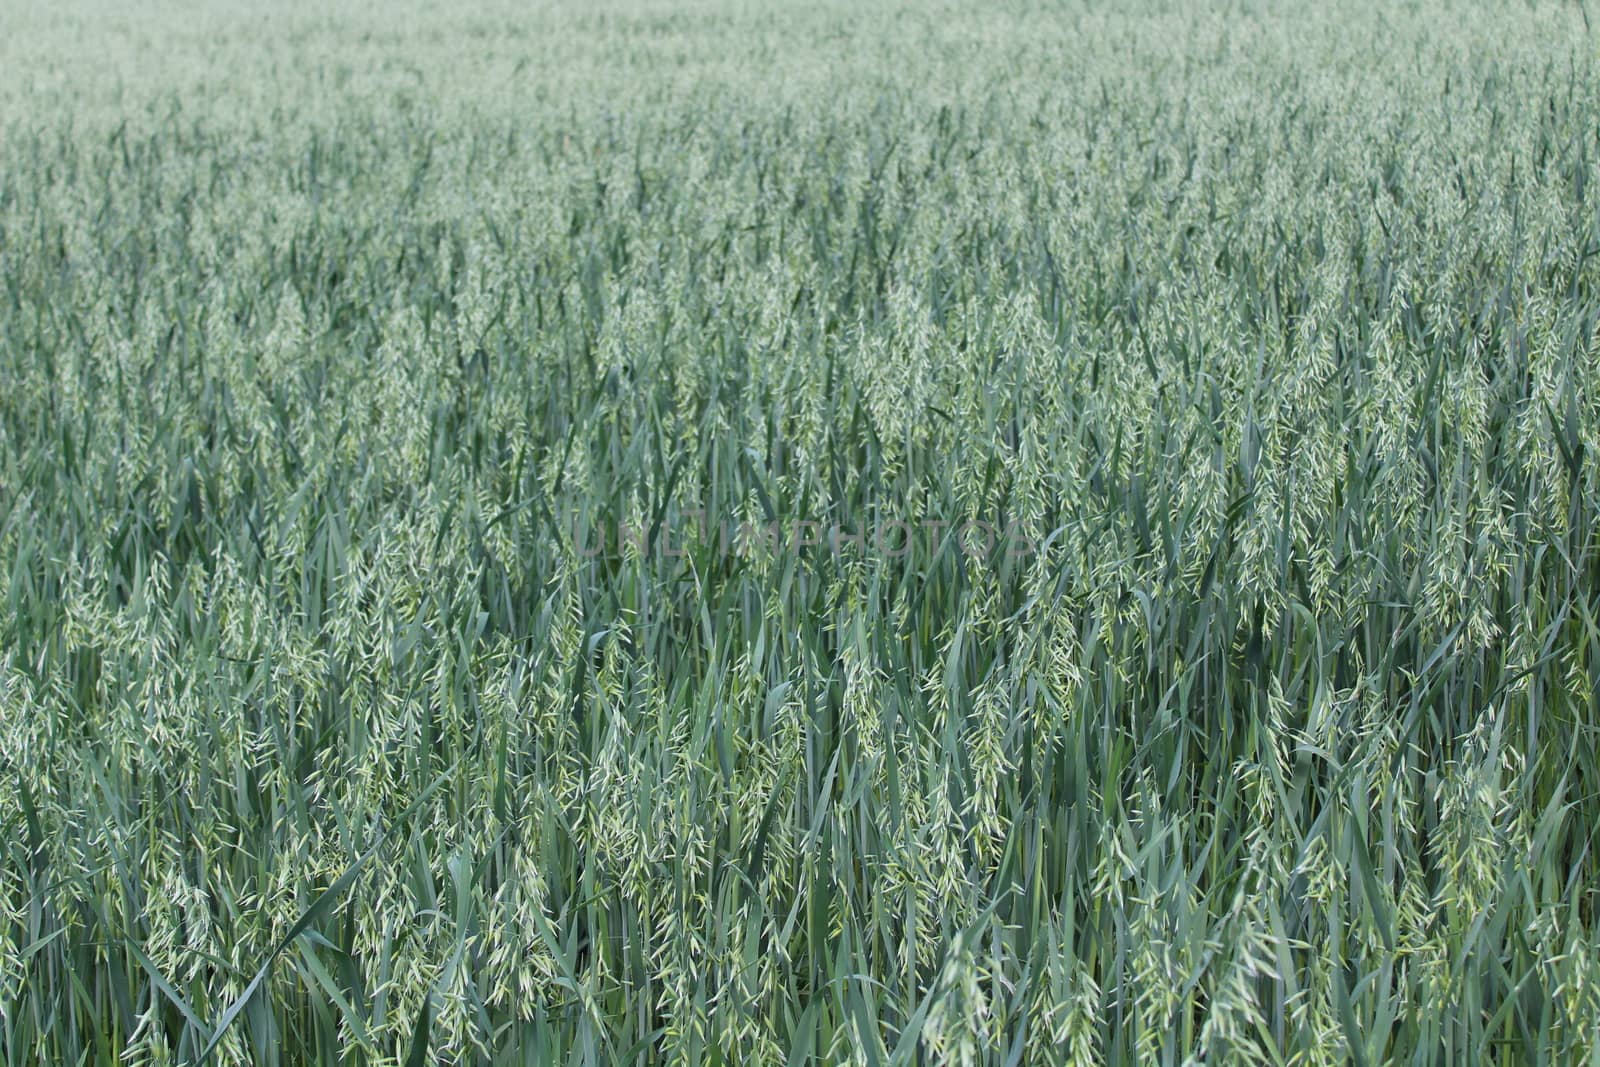 a field with unripe oat by martina_unbehauen